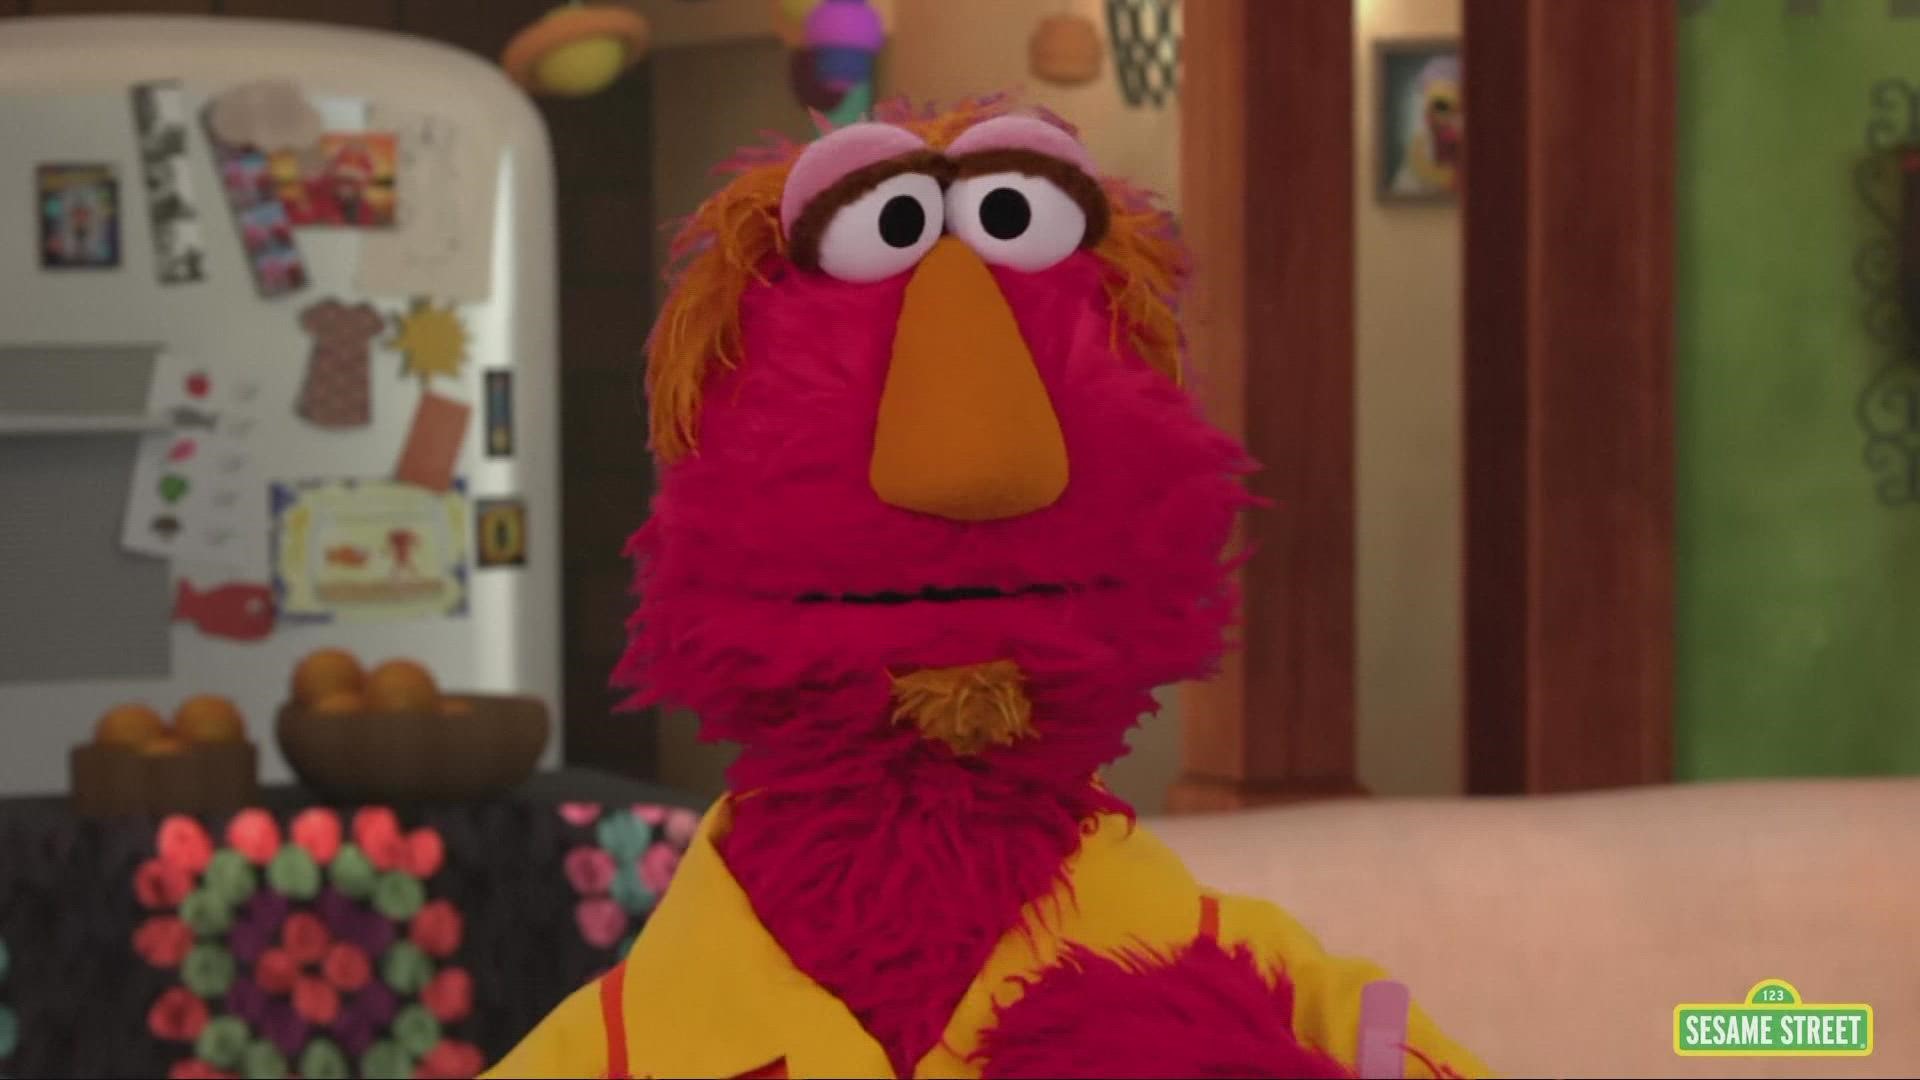 Elmo, the furry resident of Sesame Street, is now among the Americans under the age of five to receive the COVID-19 vaccine.